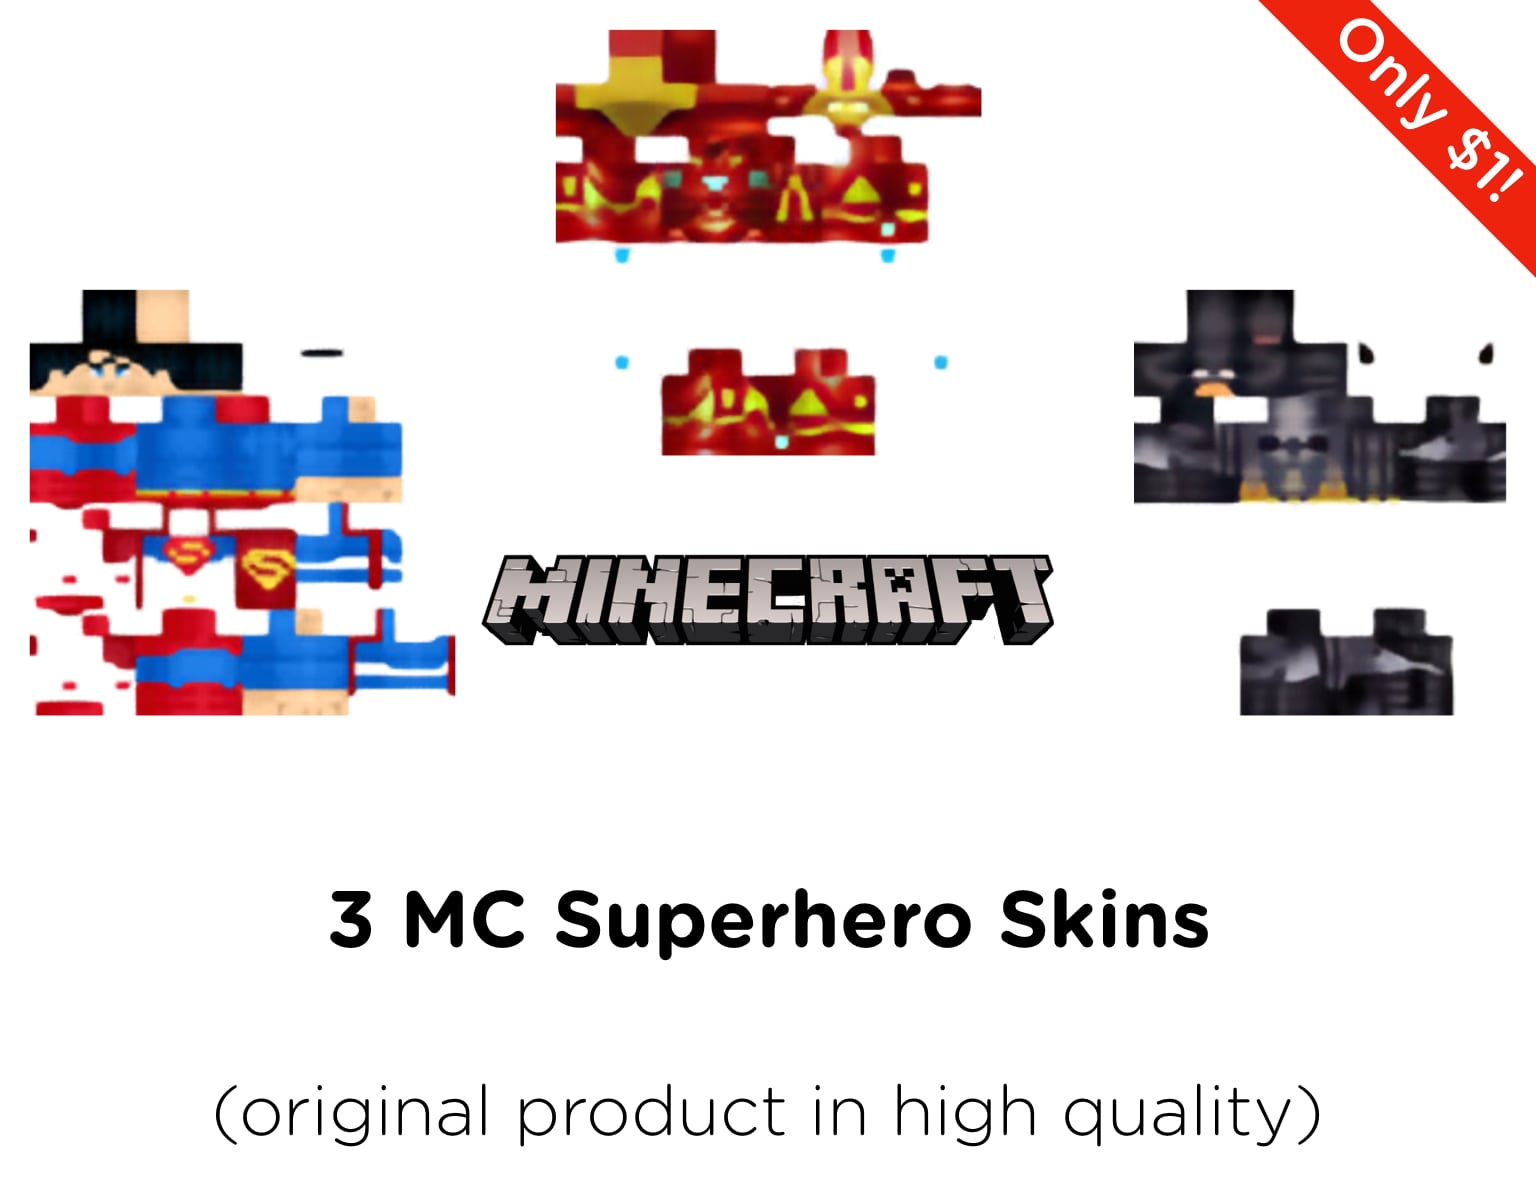 Ironman + Batman + Superman Minecraft Skins - yymasood's Ko-fi Shop - Ko-fi  ❤️ Where creators get support from fans through donations, memberships,  shop sales and more! The original 'Buy Me a Coffee' Page.